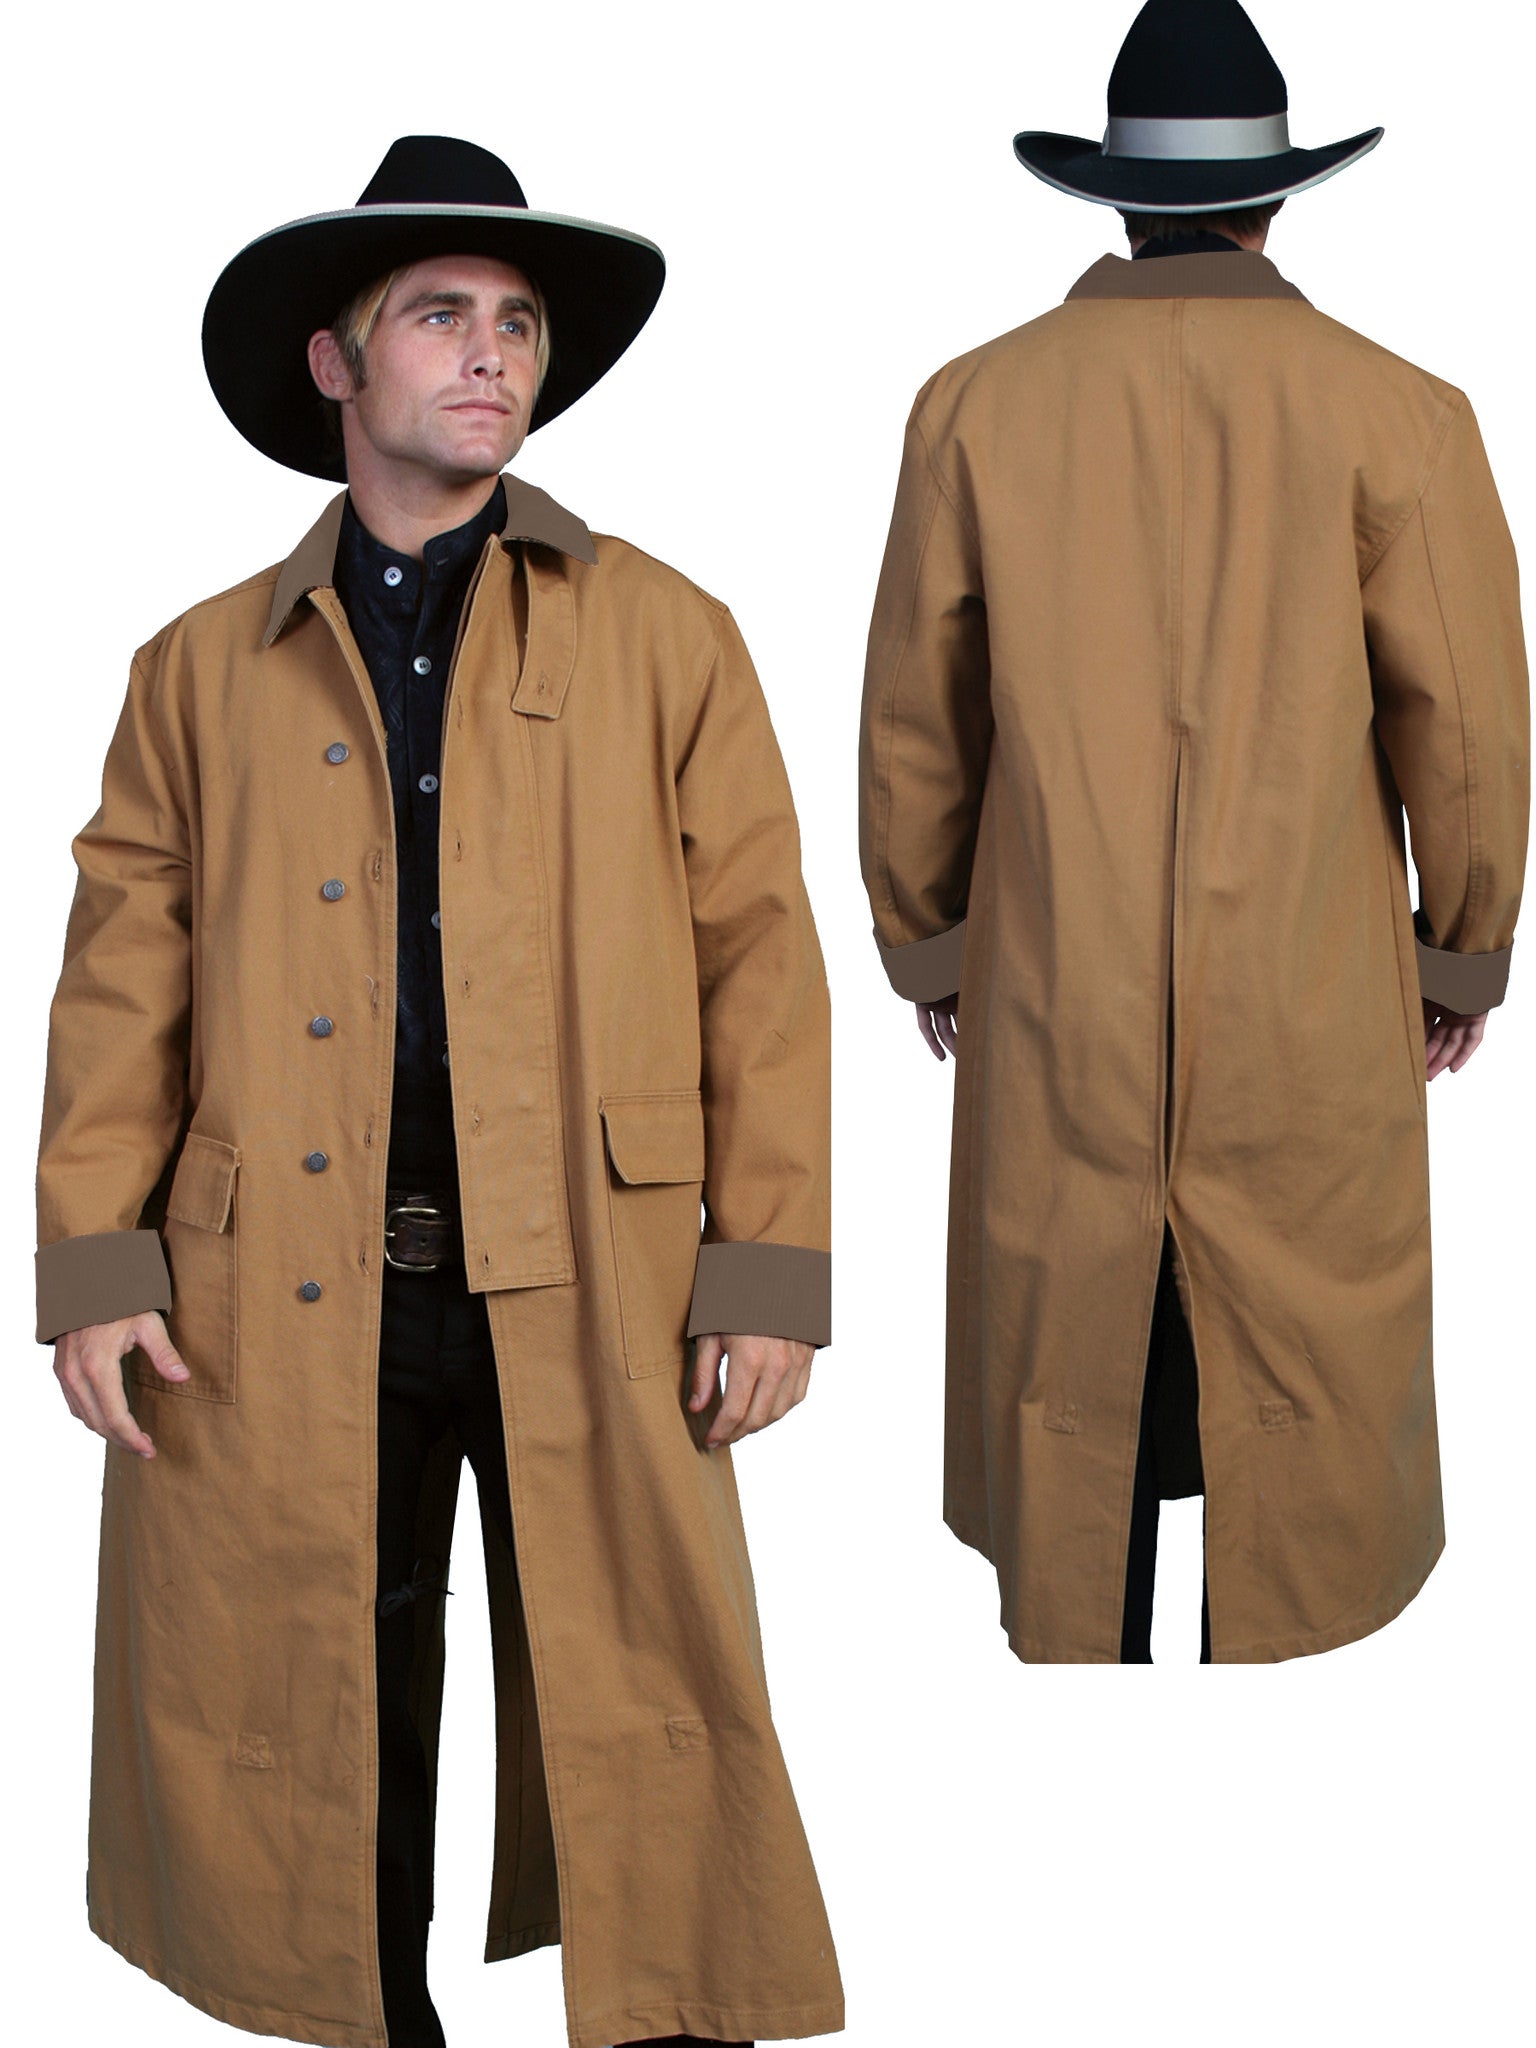 Mens Scully Old West Rangewear Canvas Duster Front and Back Black